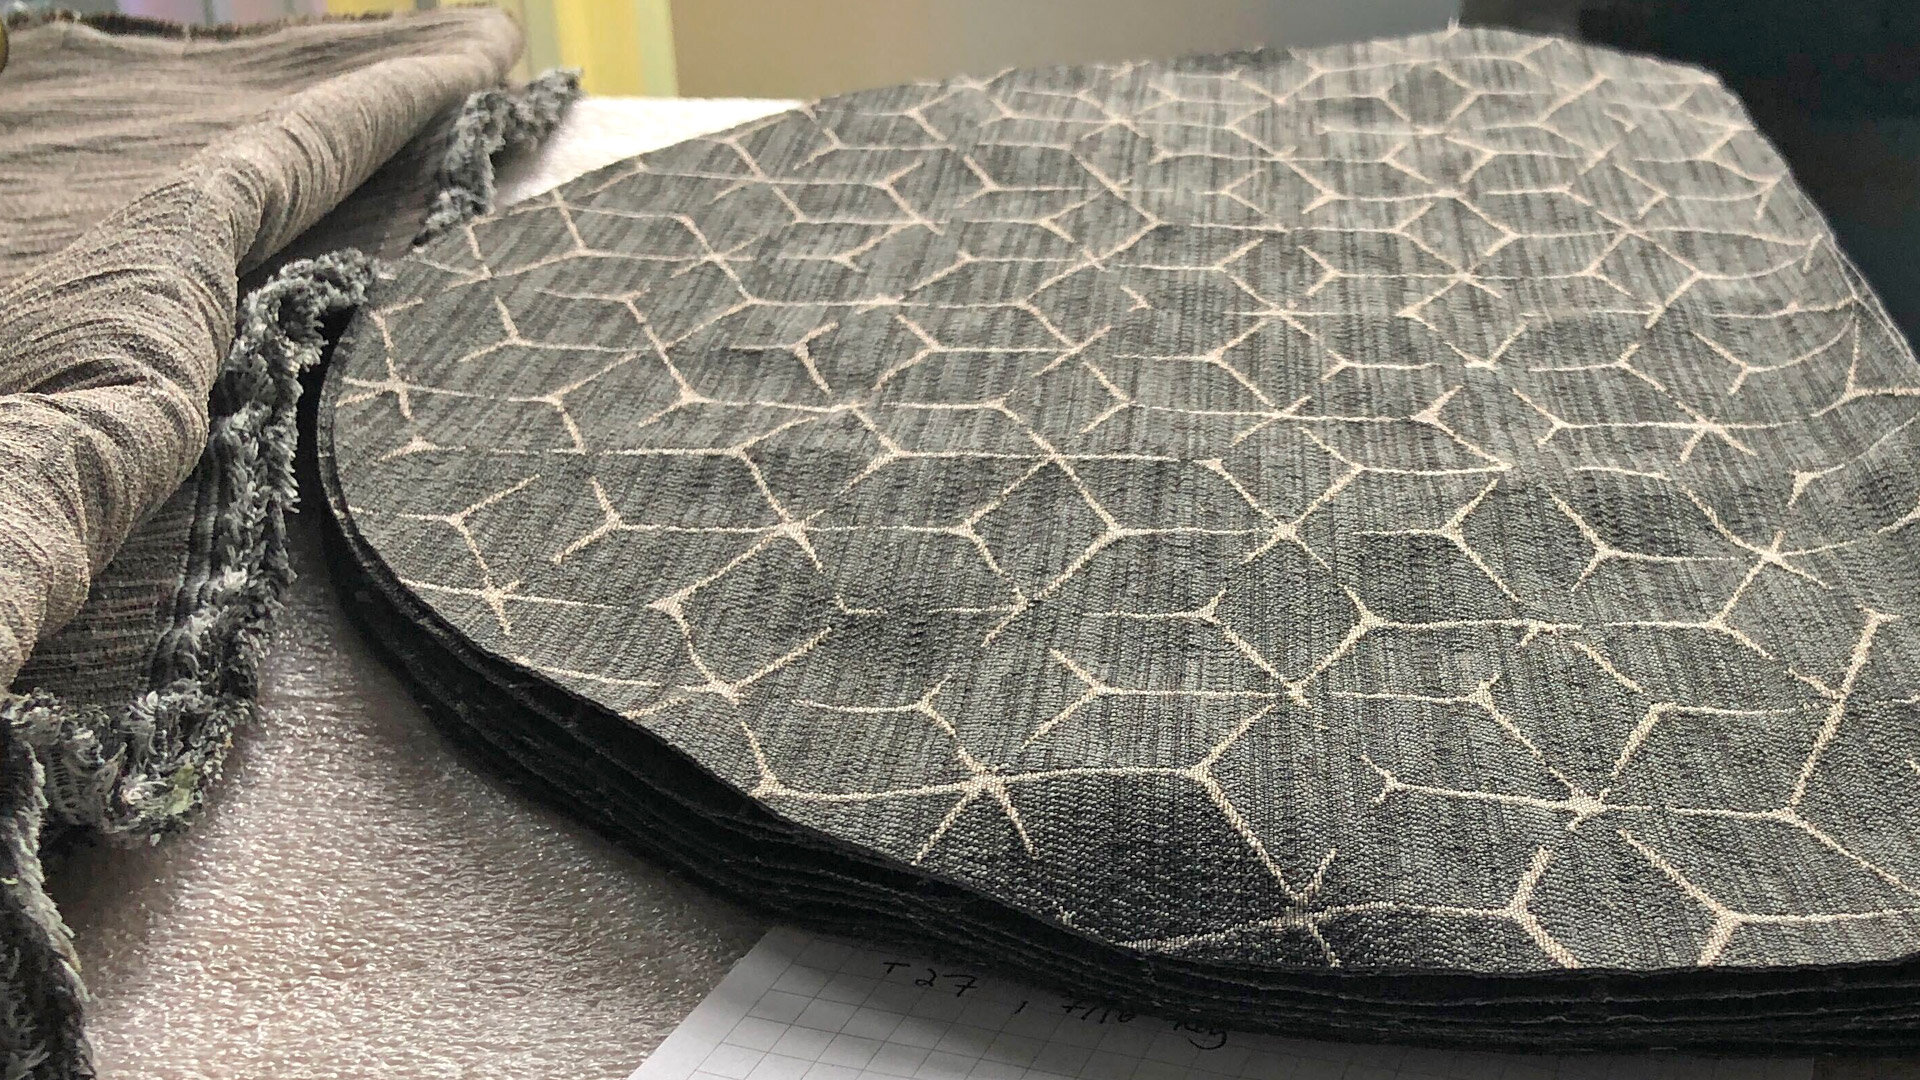  Still more lasering. All the top faux fur and bottom fabric panels for the comfy Mark1 beds were cut with a laser to help keep things crisp and consistent for sewing. Also, nobody really wanted to cut 108 furry circles by hand either. 